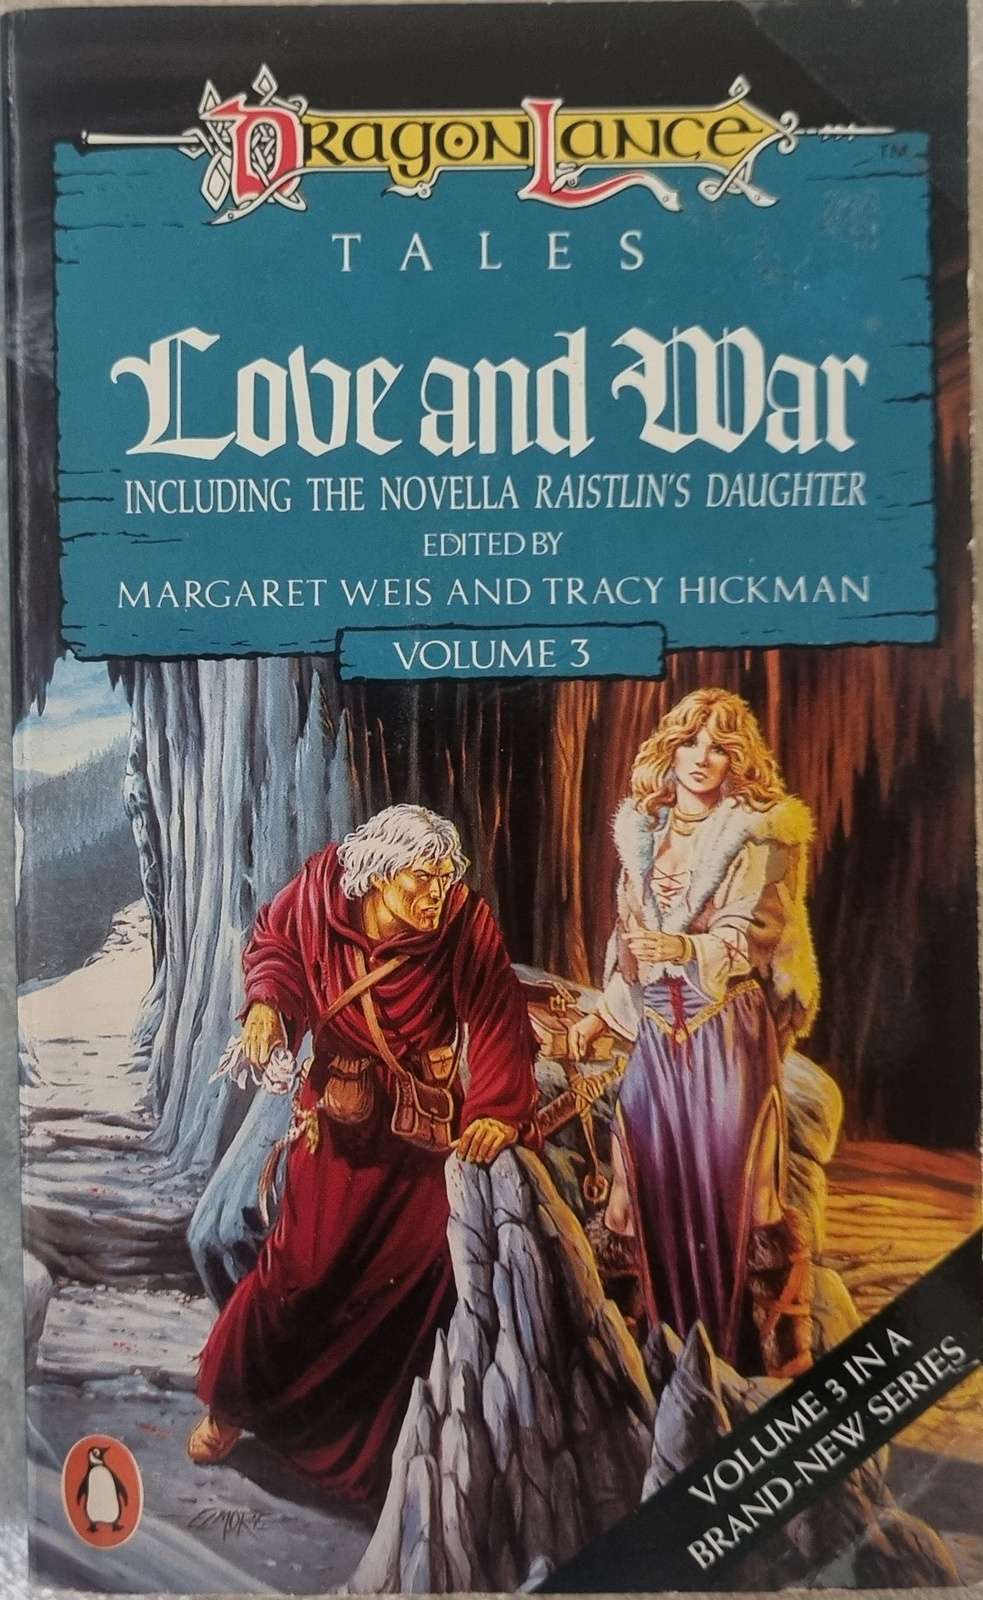 Dragonlance Tales: Love and War - Margaret Weis & Tracy Hickman